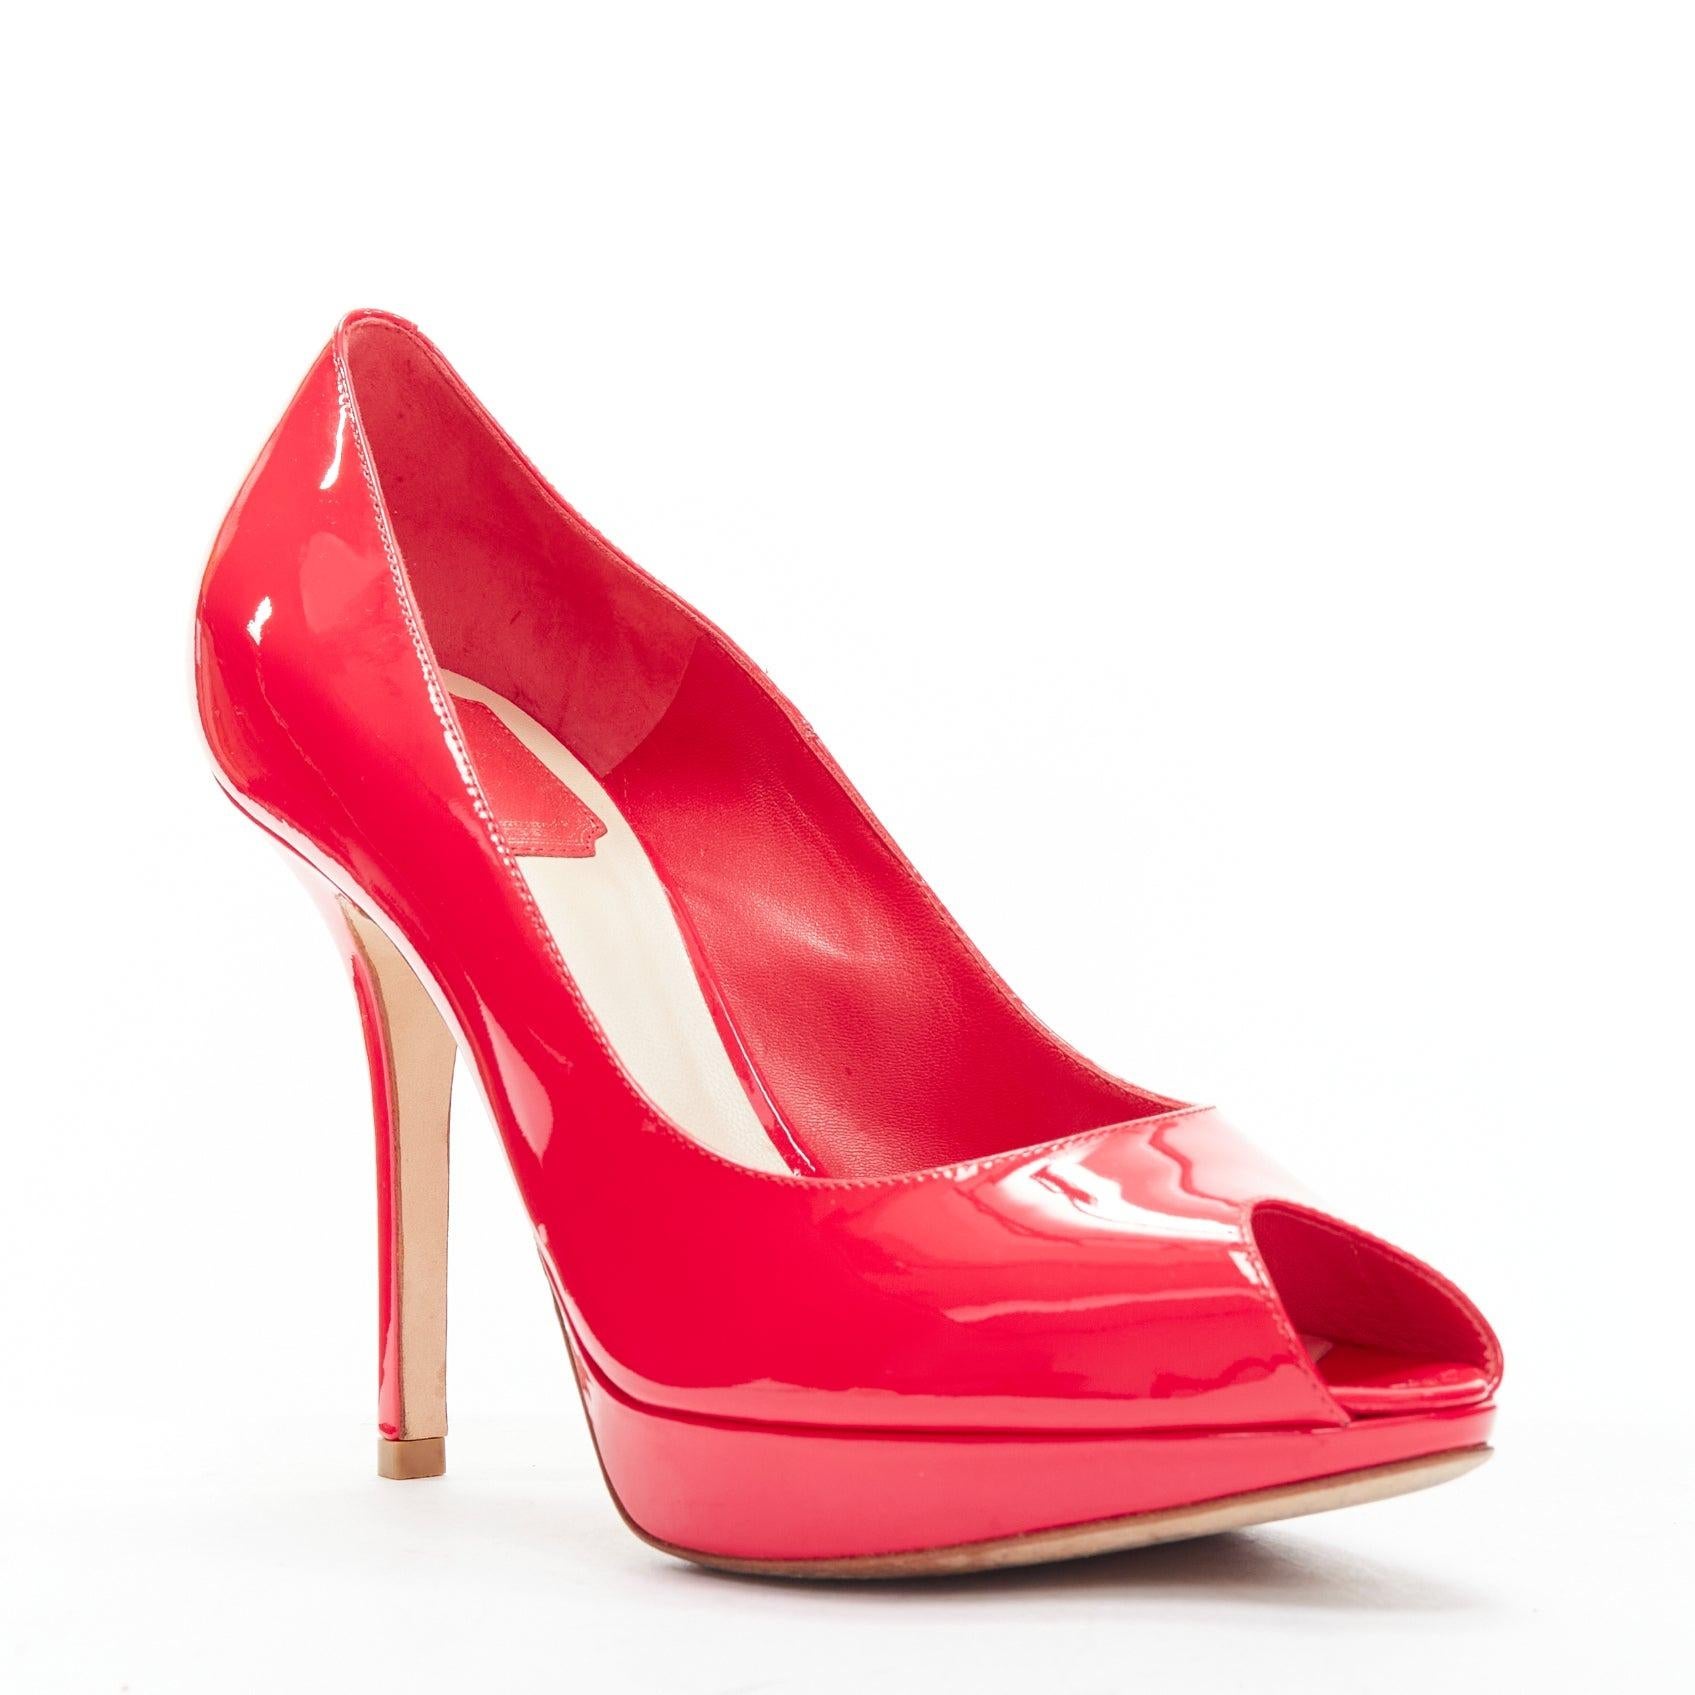 CHRISTIAN DIOR neon pink patent leather peep toe platform pumps EU38
Reference: MEKK/A00008
Brand: Christian Dior
Material: Leather
Color: Neon Pink
Pattern: Solid
Closure: Slip On
Lining: Nude Leather
Extra Details: Logo plate at back.
Made in: